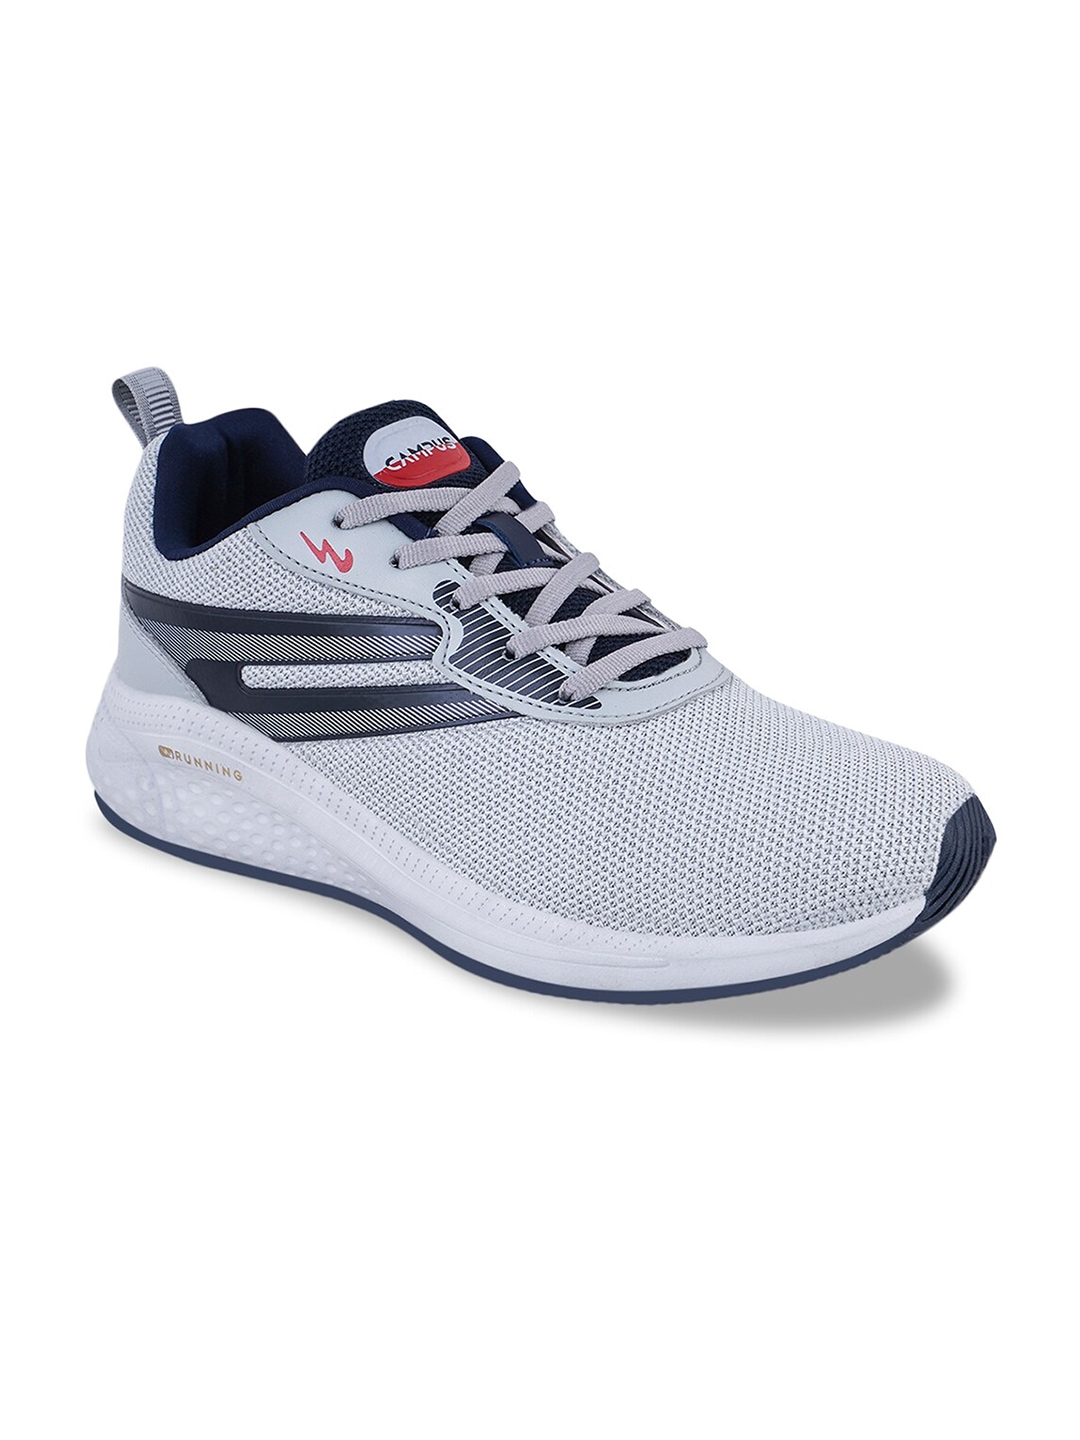 

Campus Men SPOTTED Memory Tech Lite Mesh Non-Marking Running Shoes, Grey